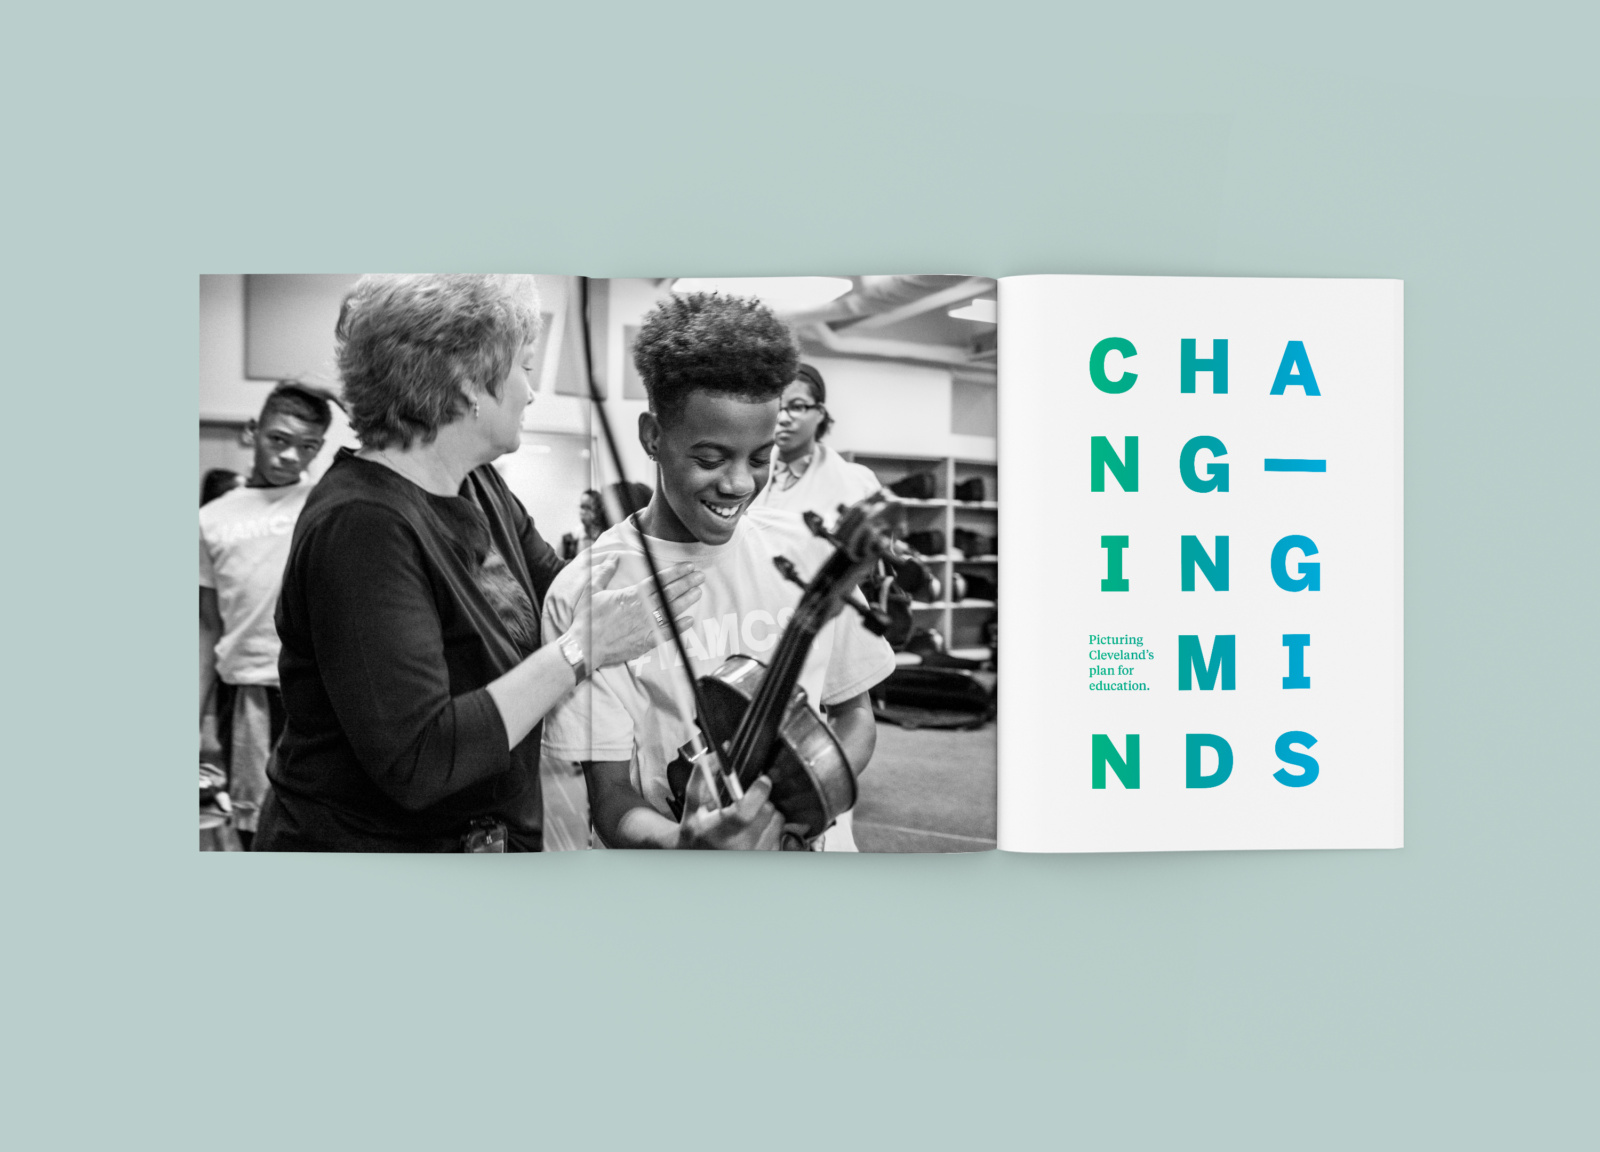 Inside front cover of Changing Minds annual report design for The George Gund Foundation with photograph by Lisa Kessler